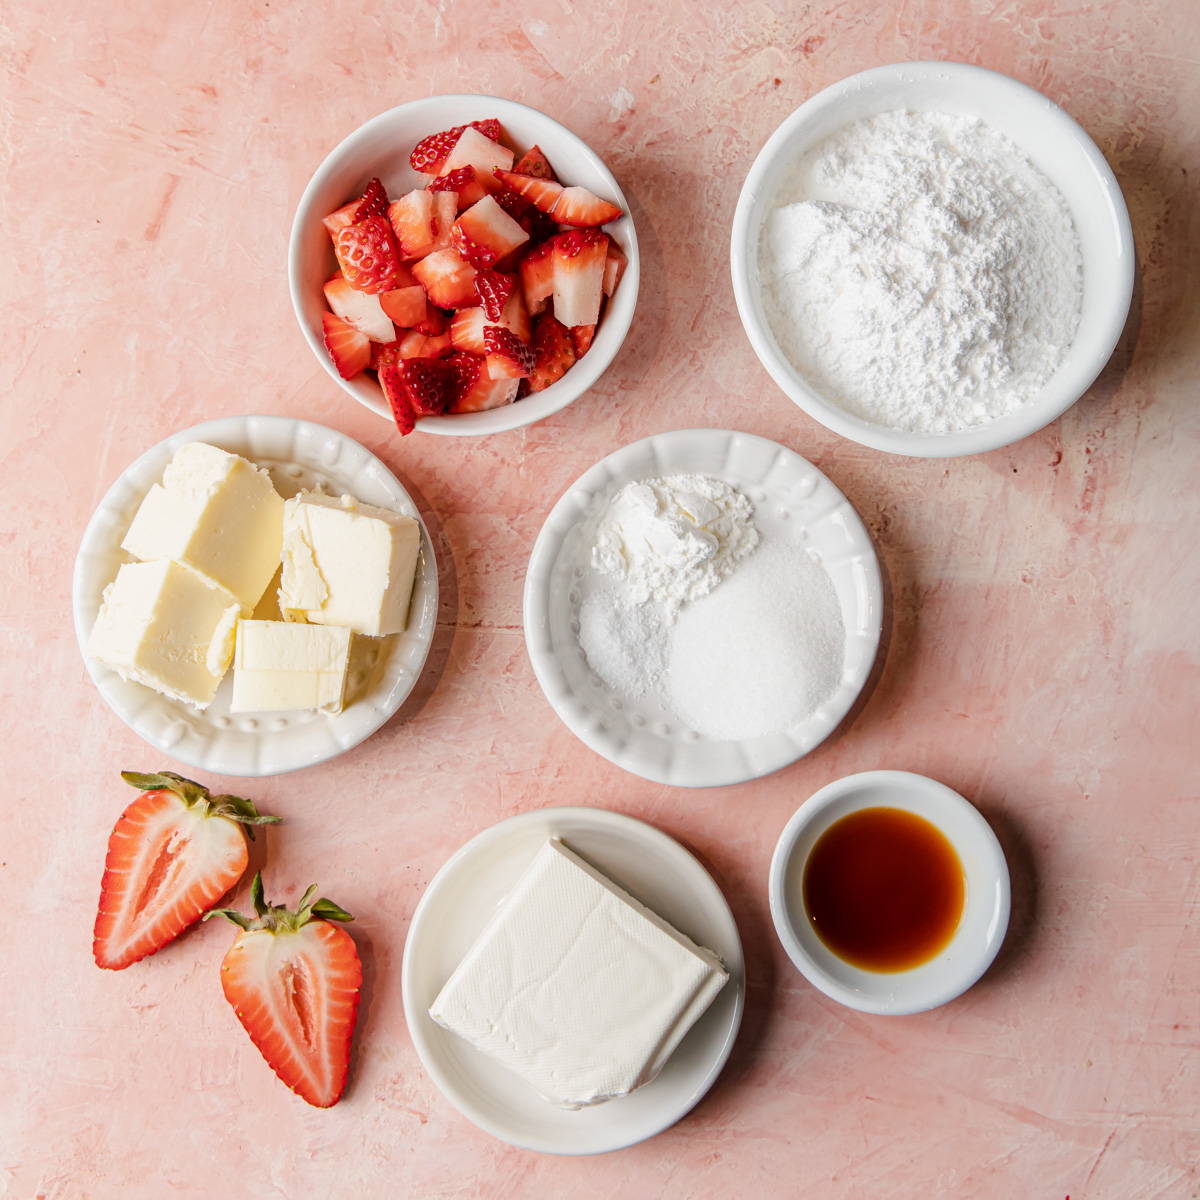 Ingredients needed to make strawberry cream cheese frosting